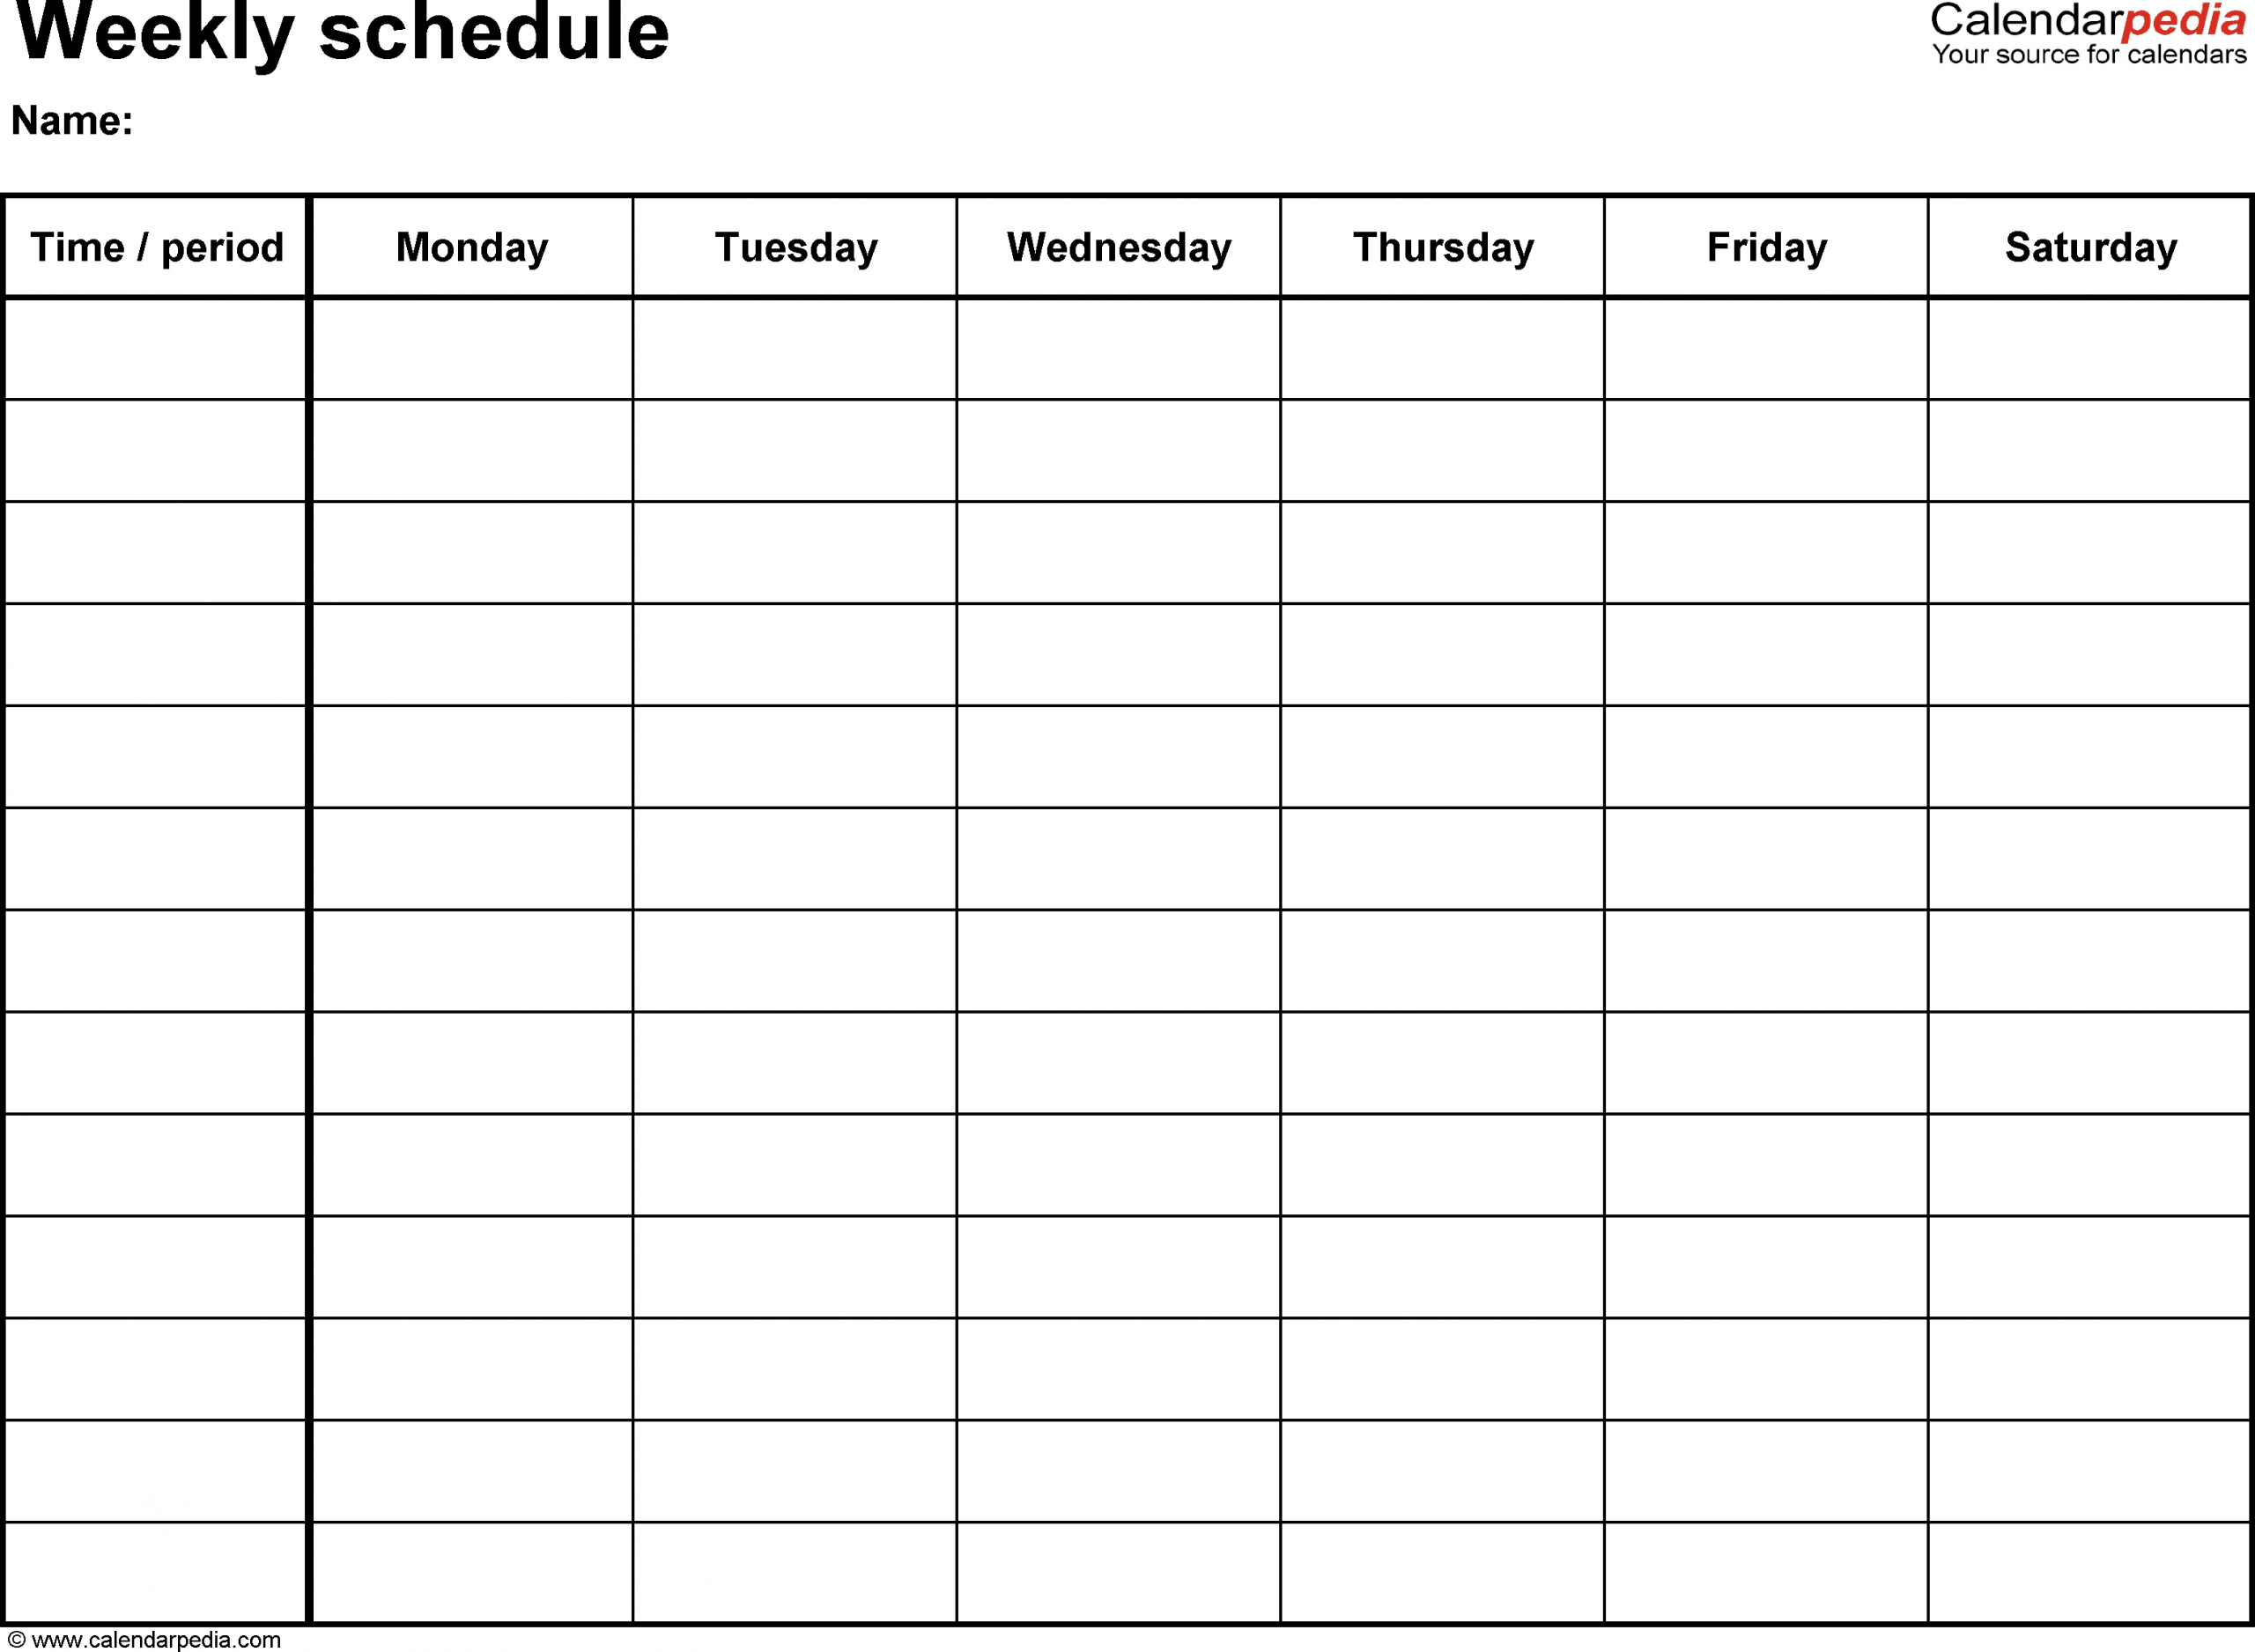 Free Weekly Schedule Templates For Excel - 18 Templates inside Day And Time Calendar Template